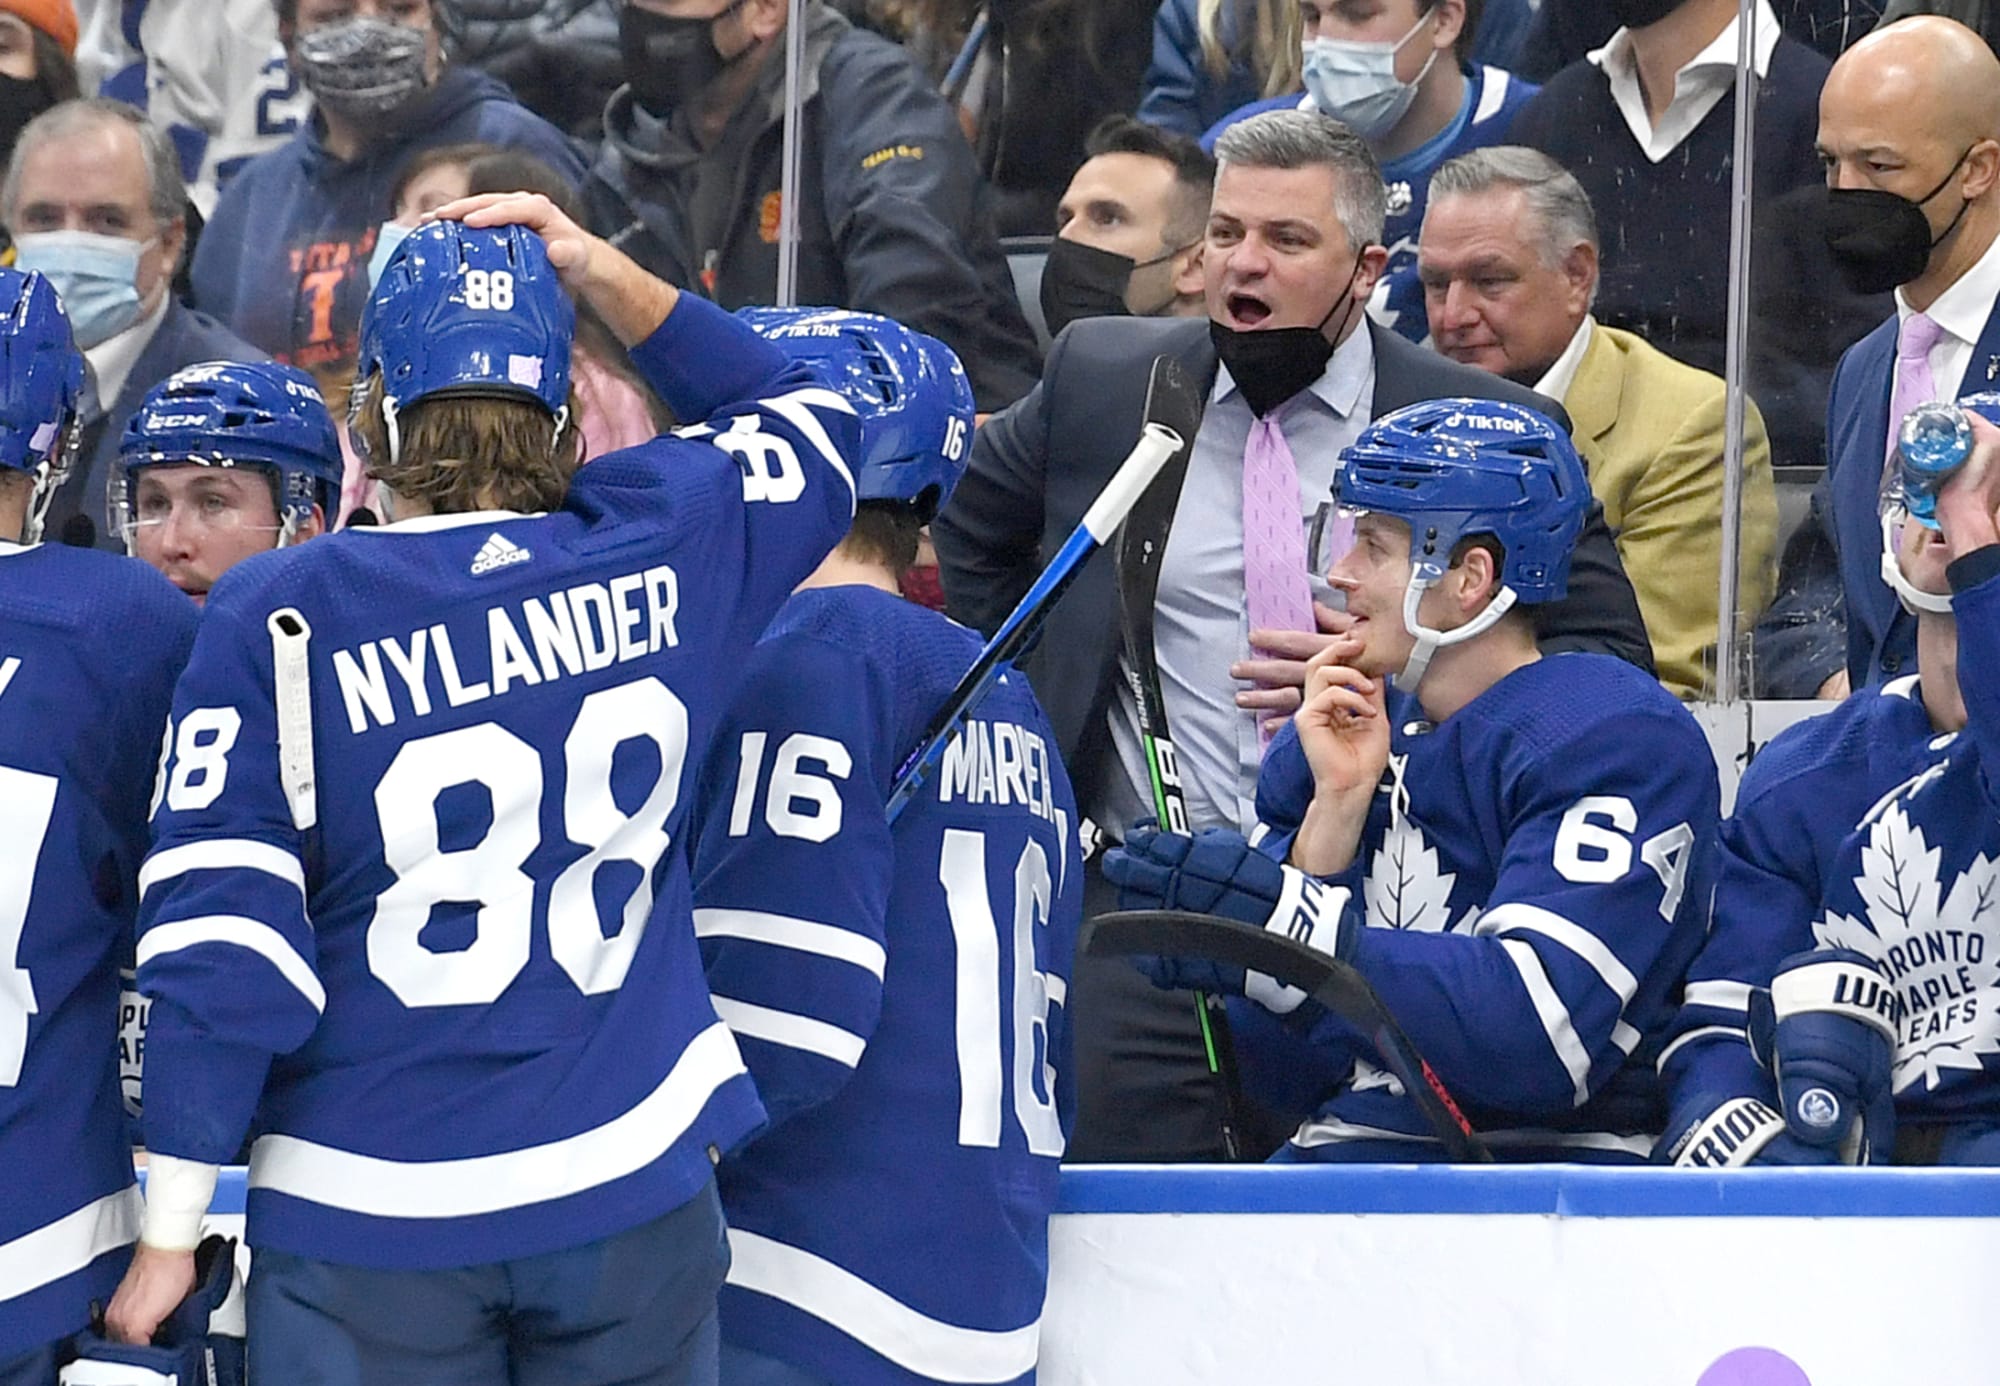 Toronto Maple Leafs breaking records with Sheldon Keefe at the helm